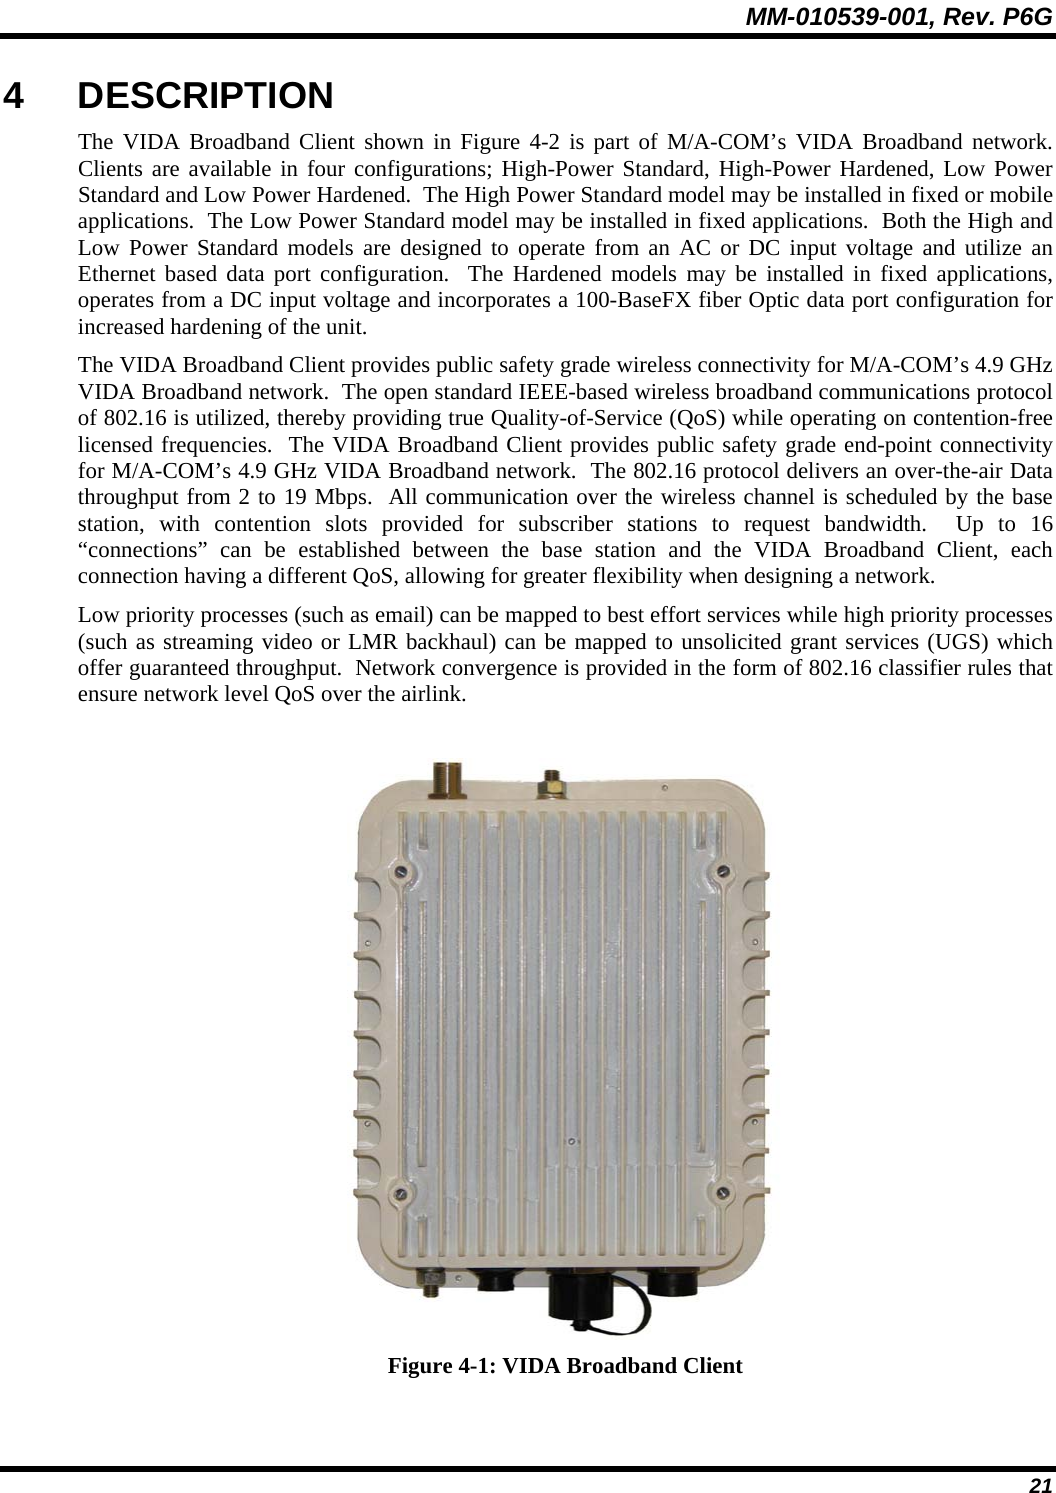 MM-010539-001, Rev. P6G  21 4 DESCRIPTION The VIDA Broadband Client shown in Figure 4-2 is part of M/A-COM’s VIDA Broadband network.  Clients are available in four configurations; High-Power Standard, High-Power Hardened, Low Power Standard and Low Power Hardened.  The High Power Standard model may be installed in fixed or mobile applications.  The Low Power Standard model may be installed in fixed applications.  Both the High and Low Power Standard models are designed to operate from an AC or DC input voltage and utilize an Ethernet based data port configuration.  The Hardened models may be installed in fixed applications, operates from a DC input voltage and incorporates a 100-BaseFX fiber Optic data port configuration for increased hardening of the unit. The VIDA Broadband Client provides public safety grade wireless connectivity for M/A-COM’s 4.9 GHz VIDA Broadband network.  The open standard IEEE-based wireless broadband communications protocol of 802.16 is utilized, thereby providing true Quality-of-Service (QoS) while operating on contention-free licensed frequencies.  The VIDA Broadband Client provides public safety grade end-point connectivity for M/A-COM’s 4.9 GHz VIDA Broadband network.  The 802.16 protocol delivers an over-the-air Data throughput from 2 to 19 Mbps.  All communication over the wireless channel is scheduled by the base station, with contention slots provided for subscriber stations to request bandwidth.  Up to 16 “connections” can be established between the base station and the VIDA Broadband Client, each connection having a different QoS, allowing for greater flexibility when designing a network. Low priority processes (such as email) can be mapped to best effort services while high priority processes (such as streaming video or LMR backhaul) can be mapped to unsolicited grant services (UGS) which offer guaranteed throughput.  Network convergence is provided in the form of 802.16 classifier rules that ensure network level QoS over the airlink.   Figure 4-1: VIDA Broadband Client 